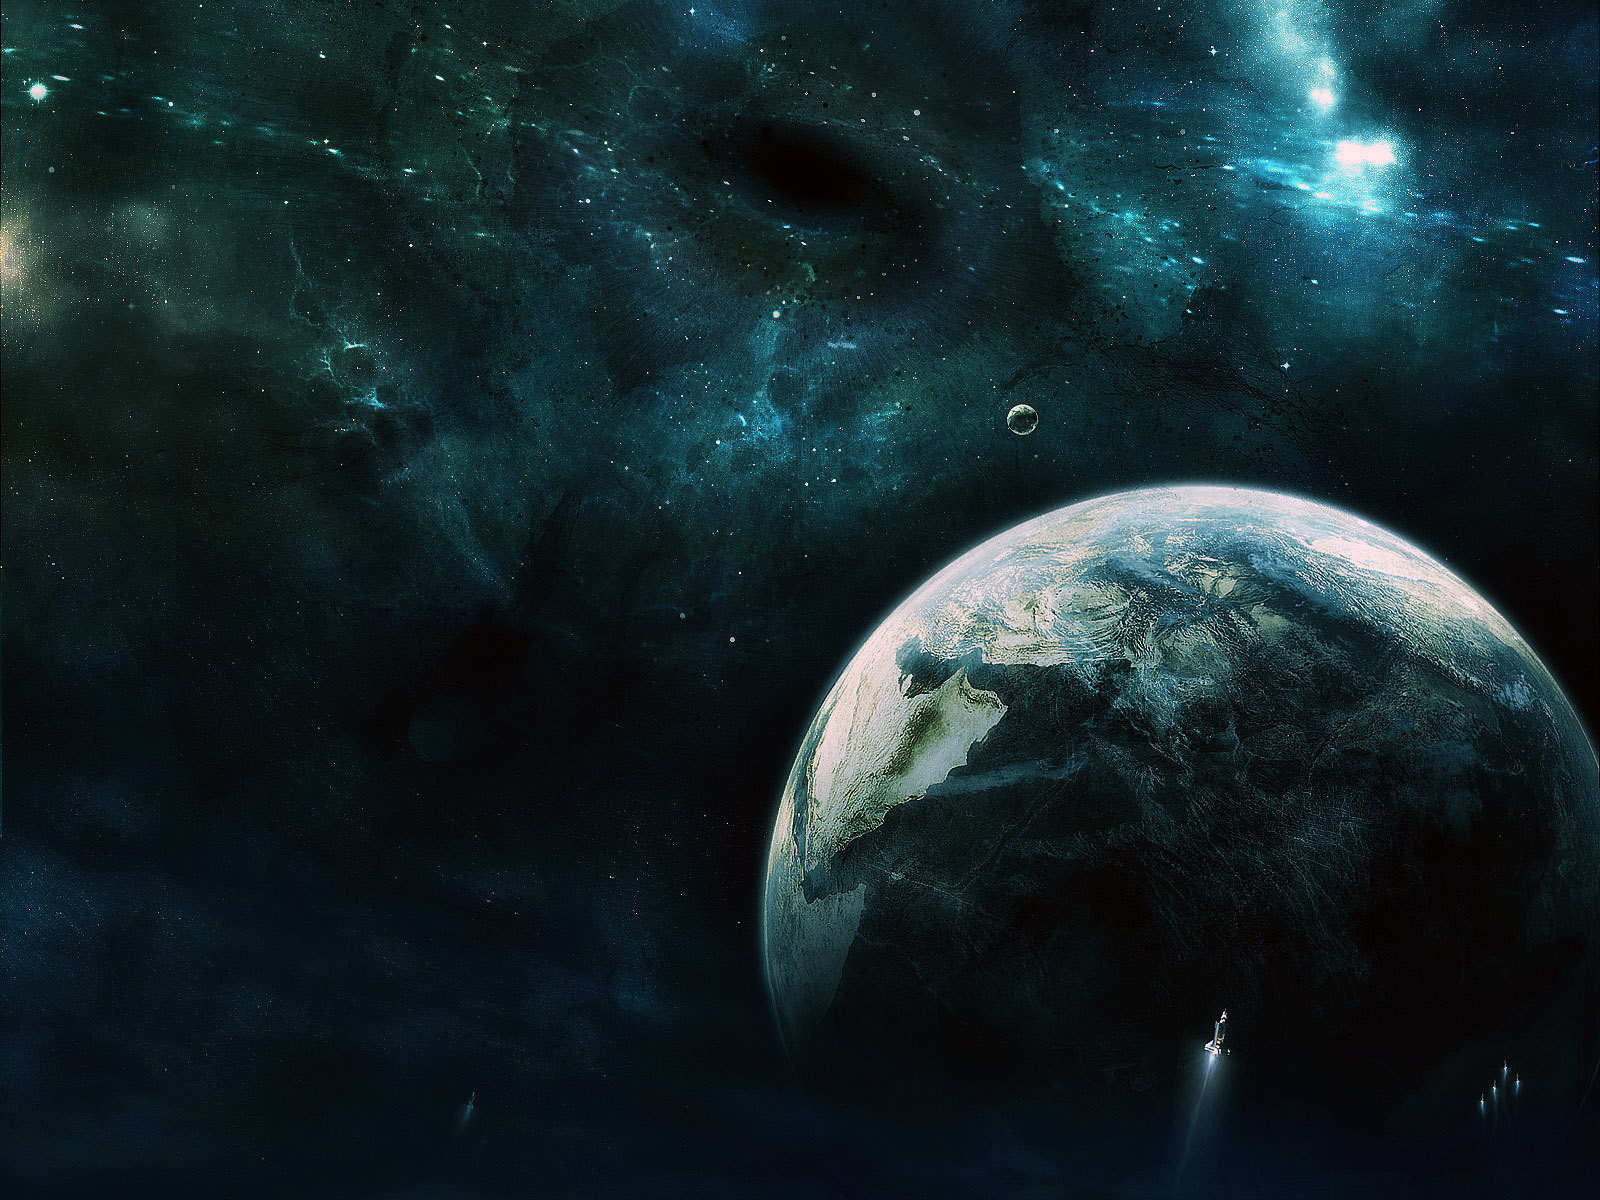 Universe Artistic Wallpapers HD 1600x1200   Photo 16 of 54 phombo